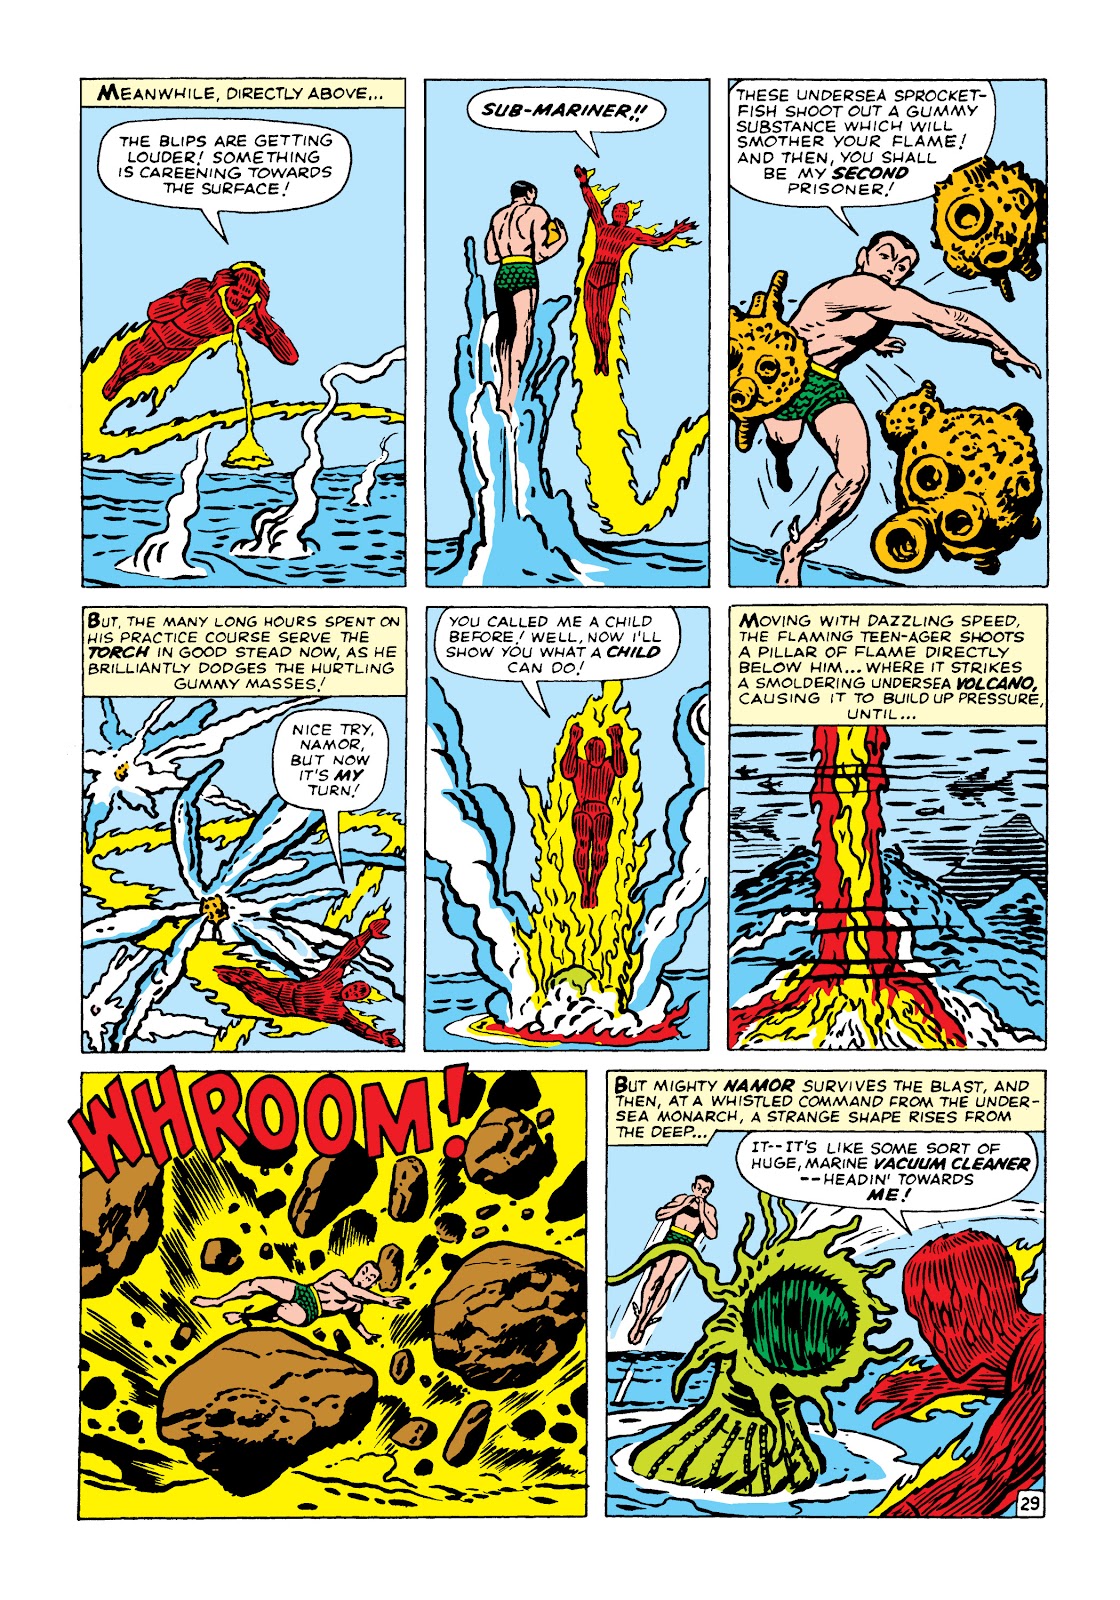 Read online Marvel Masterworks: The Fantastic Four comic - Issue # TPB 2 (Part 3) - 20